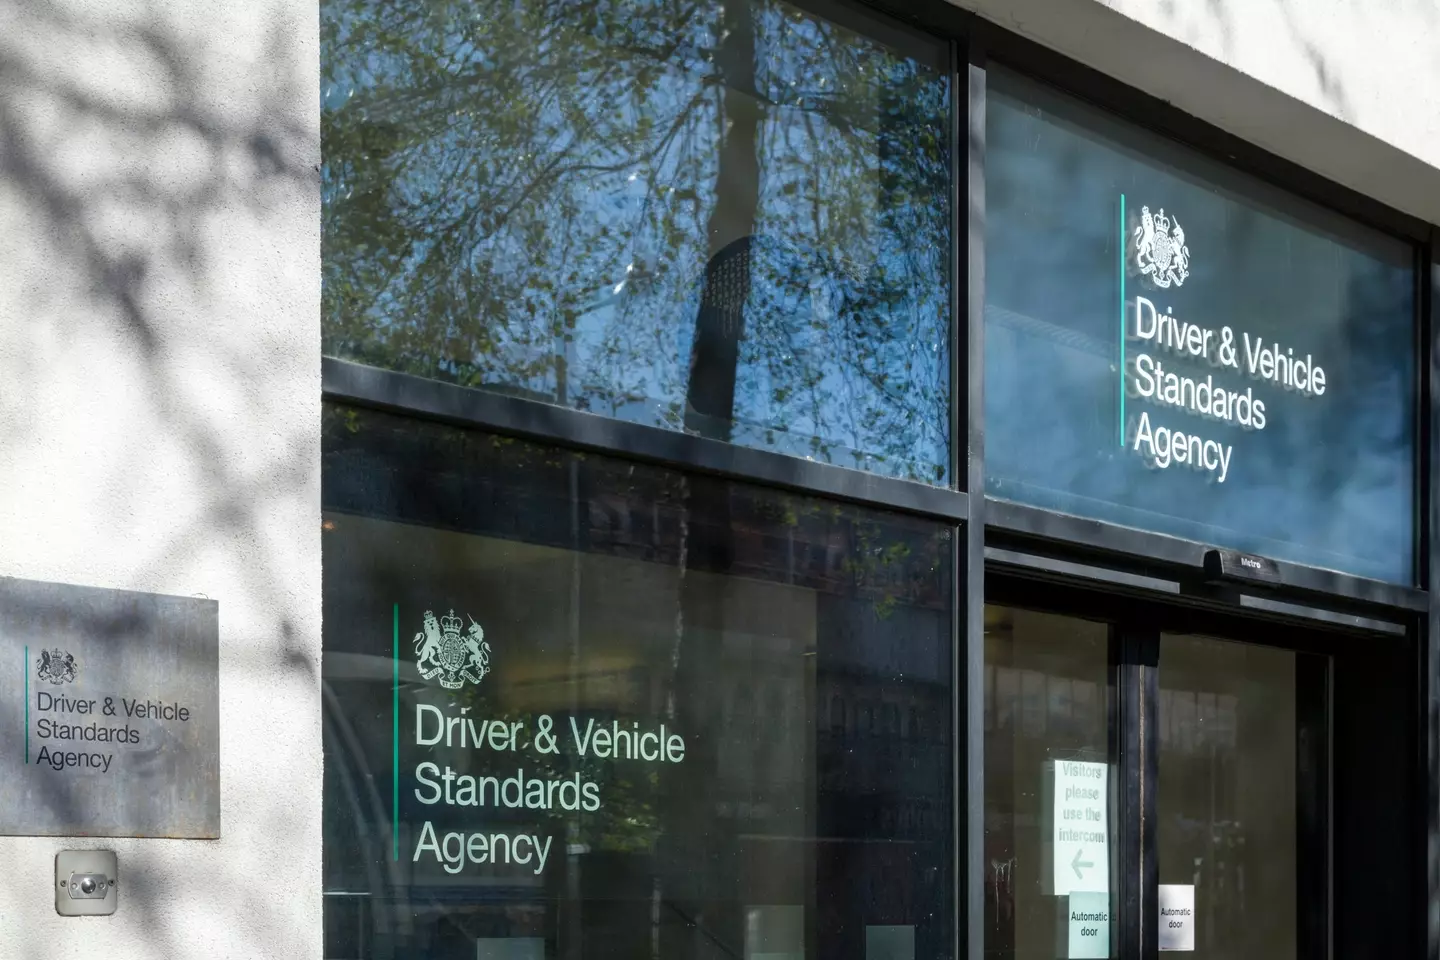 The standard fee for a weekday practical driving test with the DVSA is £62.